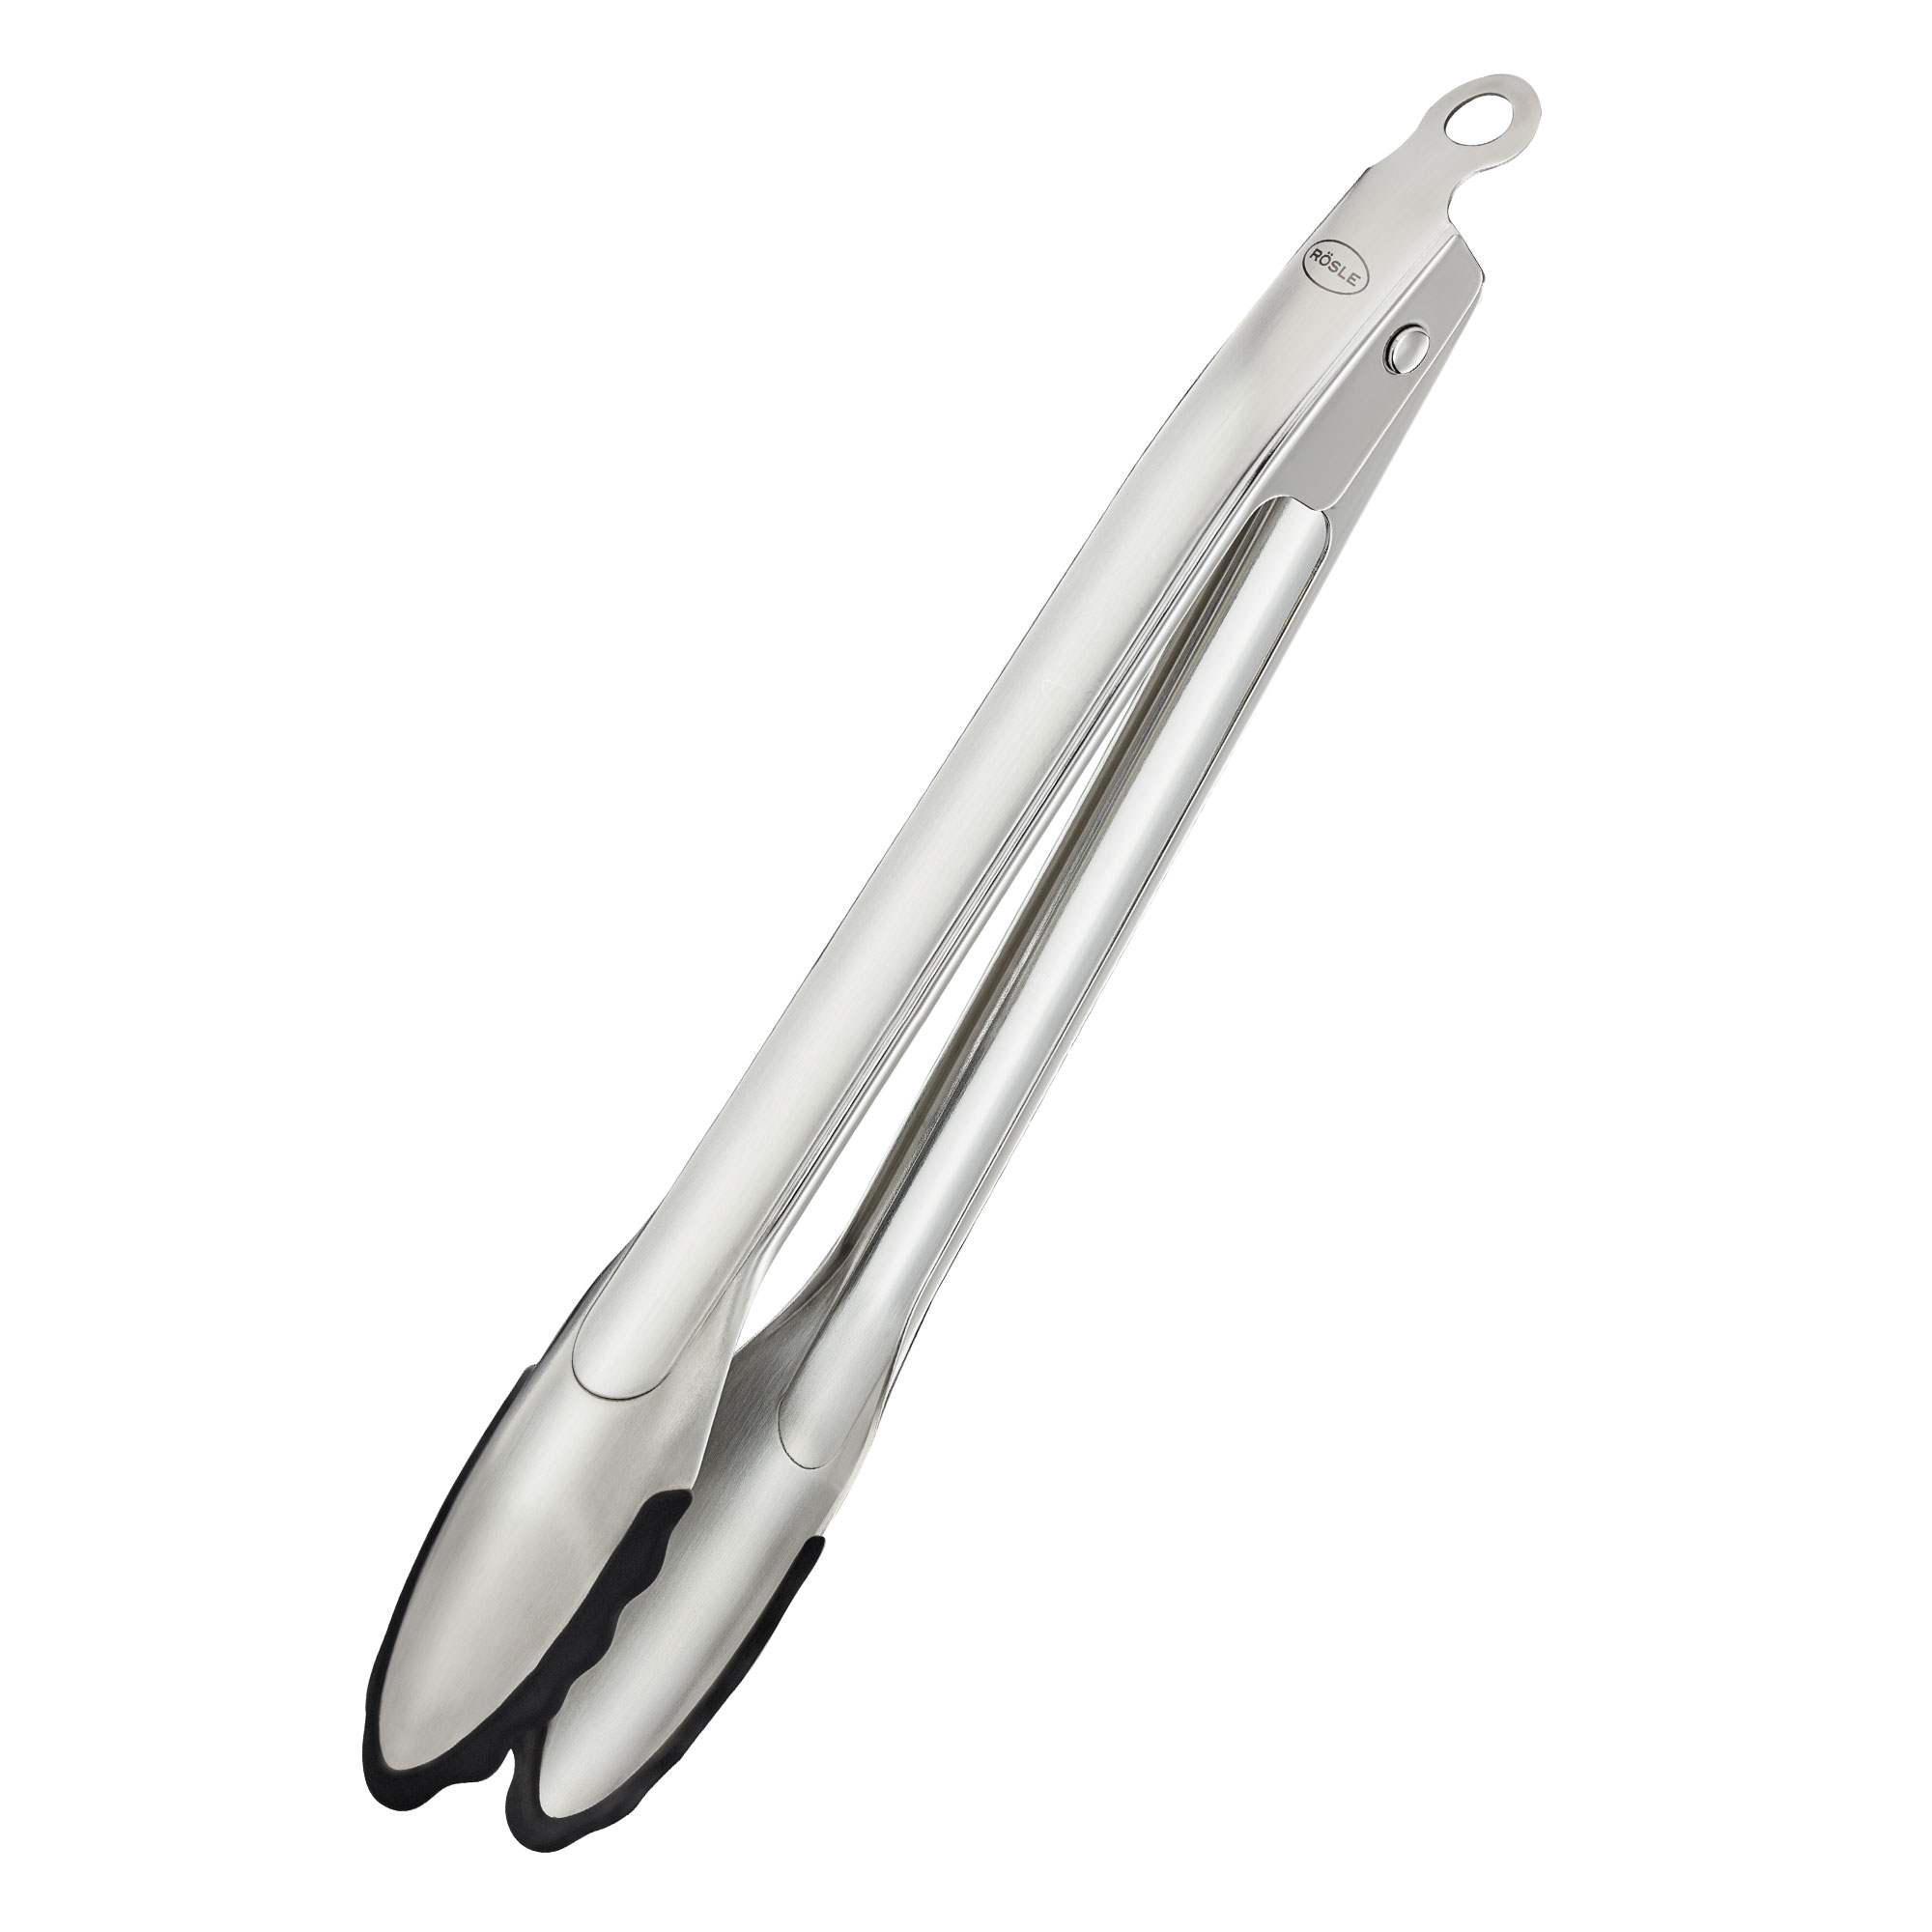 Locking Tongs silicone 30 cm|11.8 in.